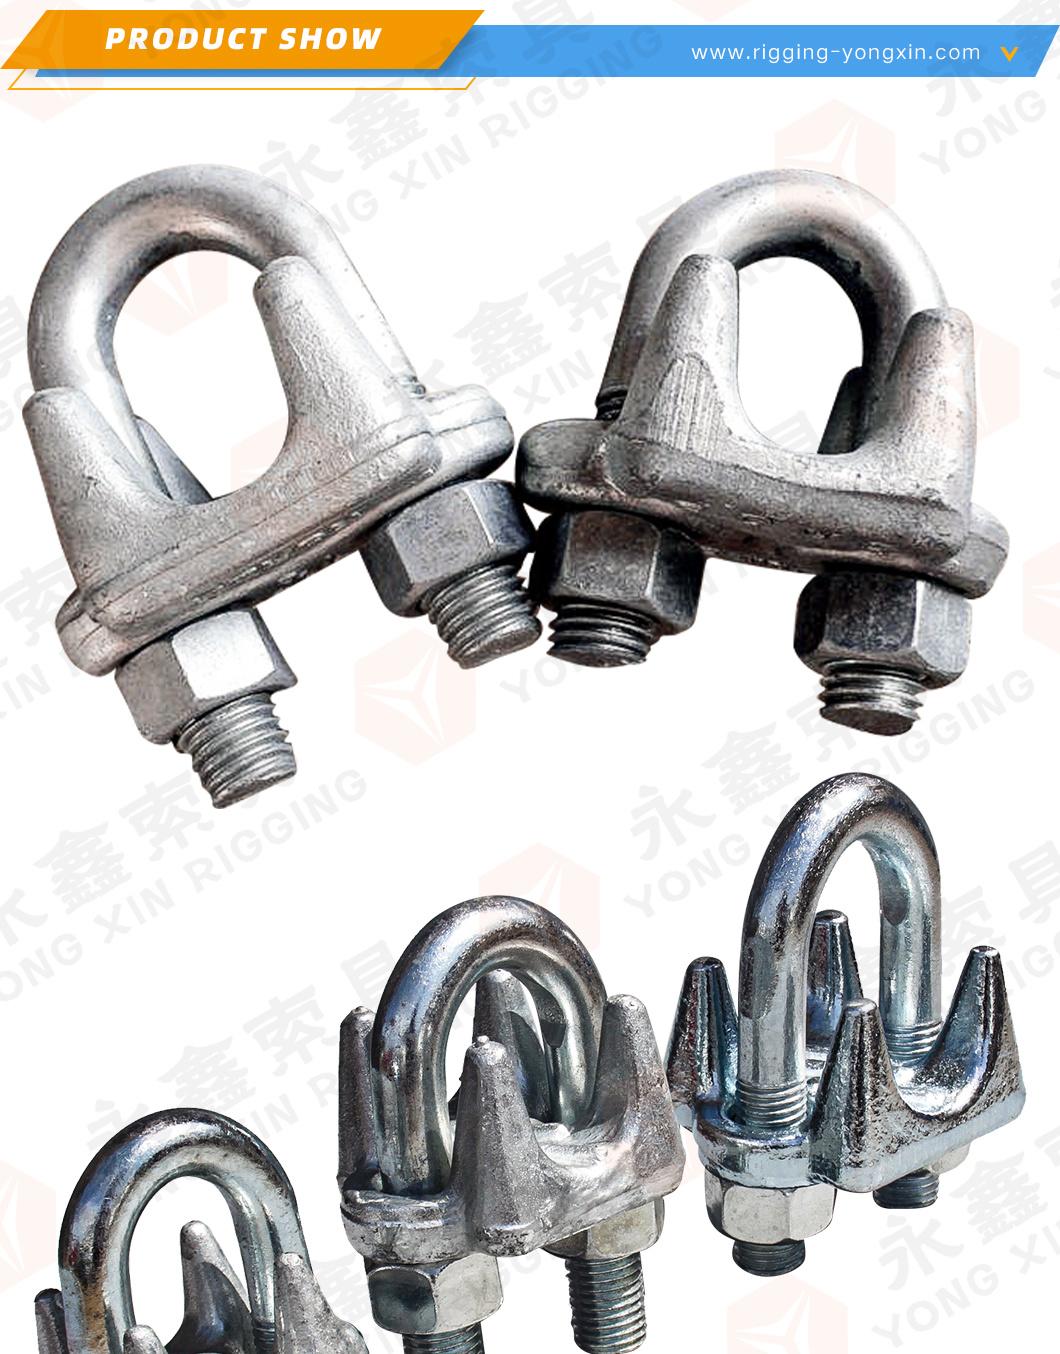 Us Type Drop Forged Wire Rope Clips Carbon Steel 450d11 Wire Rope Clips/G450 Wire Rope Clips